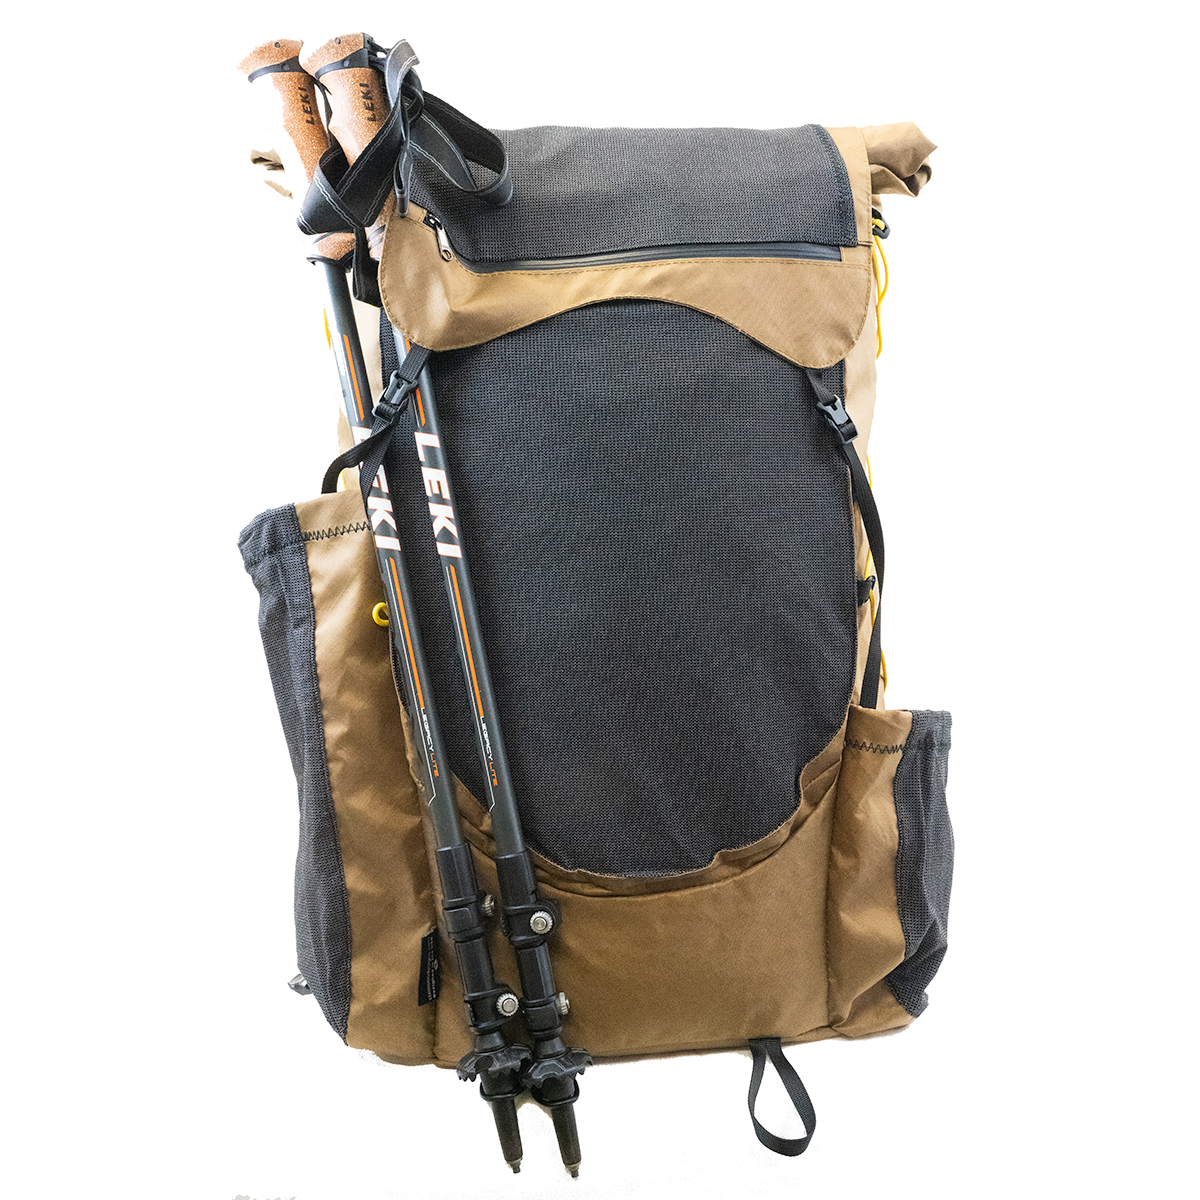 Belt Pouch - Ultralight Hiking Backpack Pouch